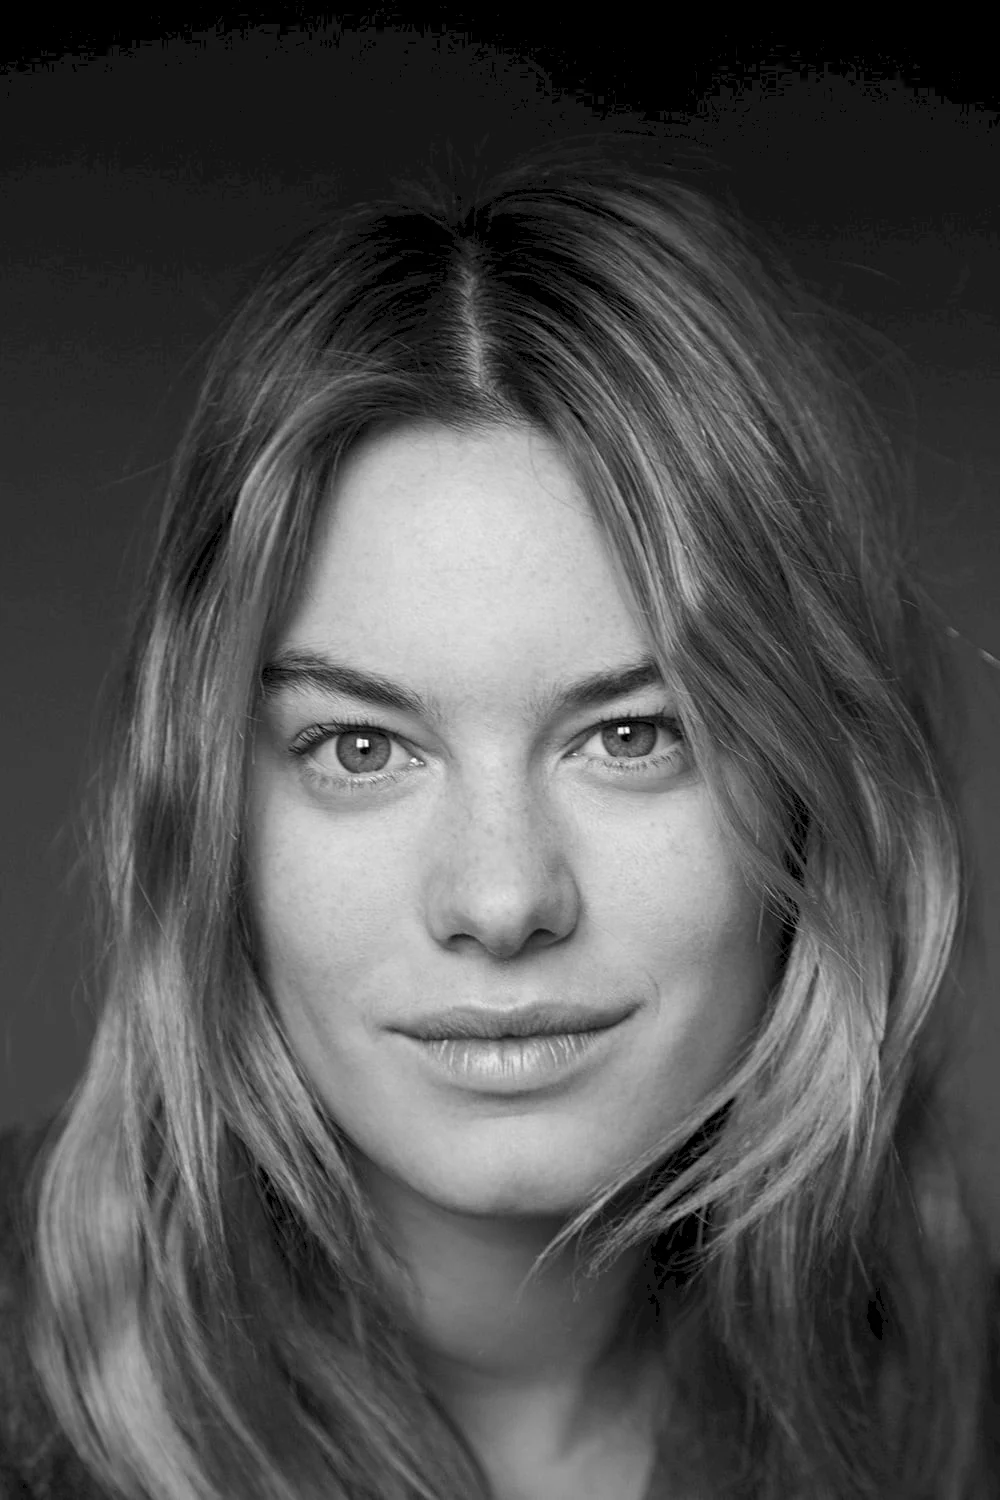  Camille Rowe